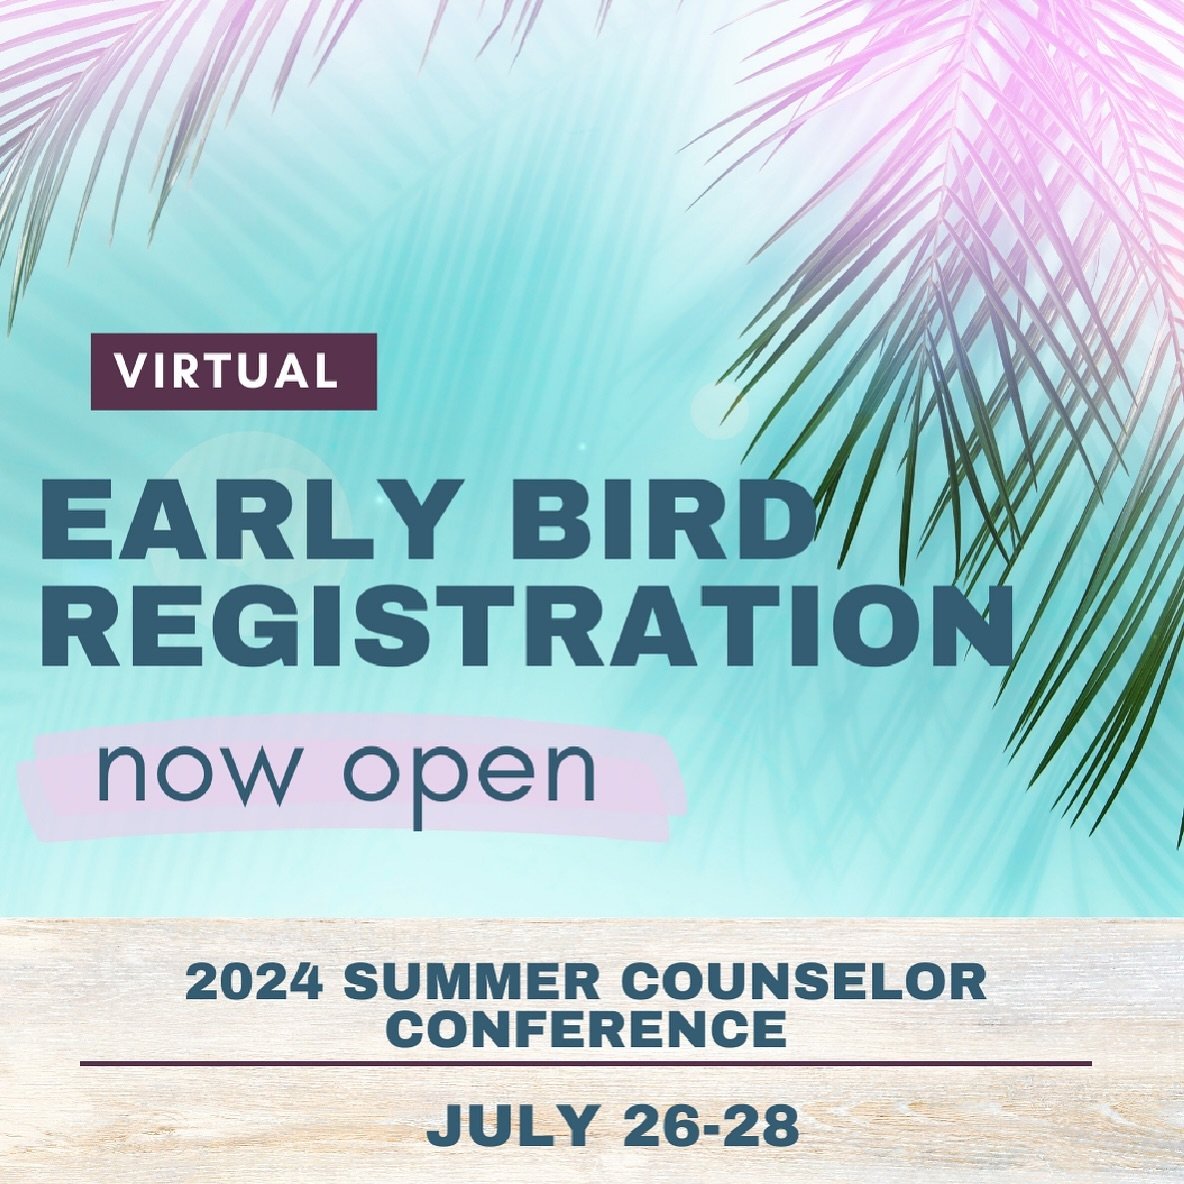 Join me at the Online Summer Counselor Conference

Registration is open for the Summer Counselor Conference! It&rsquo;s all online, so grab a ticket and a spot on your couch.

It&rsquo;s all happening from July 26-28. Over 40 sessions made for school